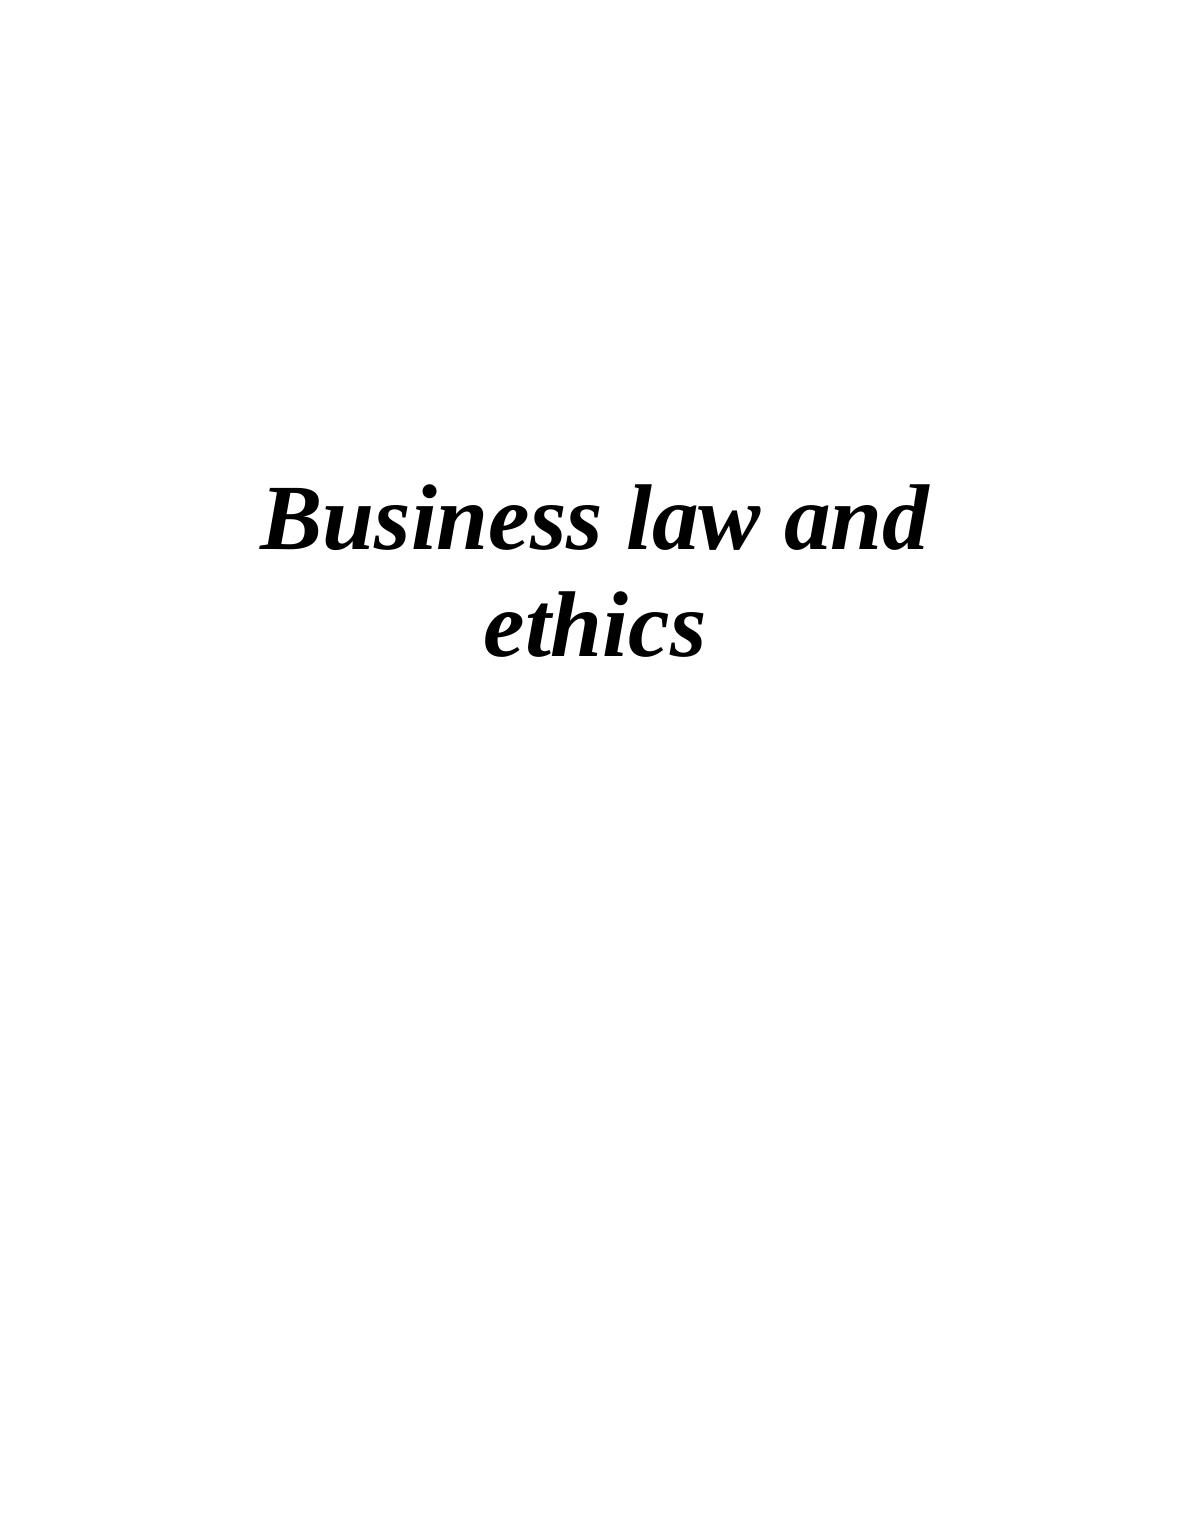 Enron Scandal: Corporate Governance and Sarbanes Oxley Act, 2002_1